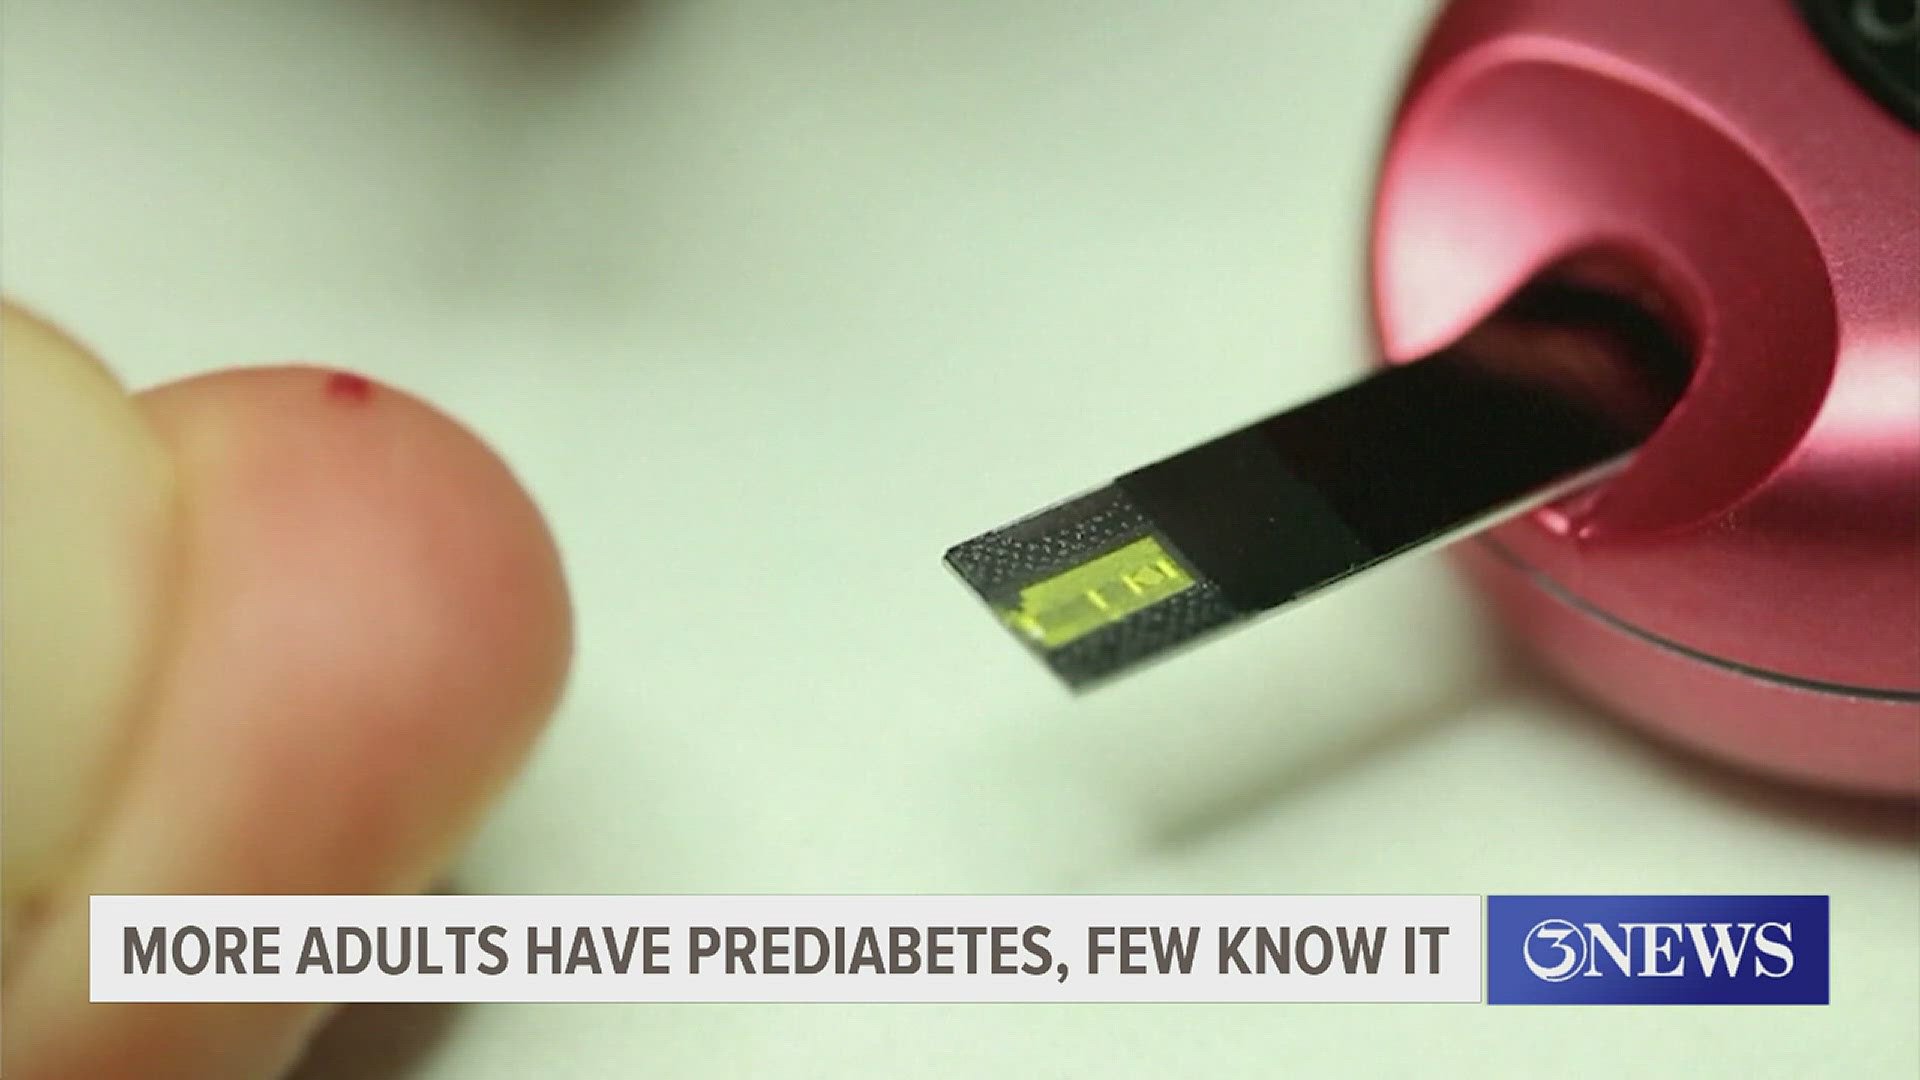 While prediabetes is common and can lead to serious medical issues, doctors say it is also reversible.